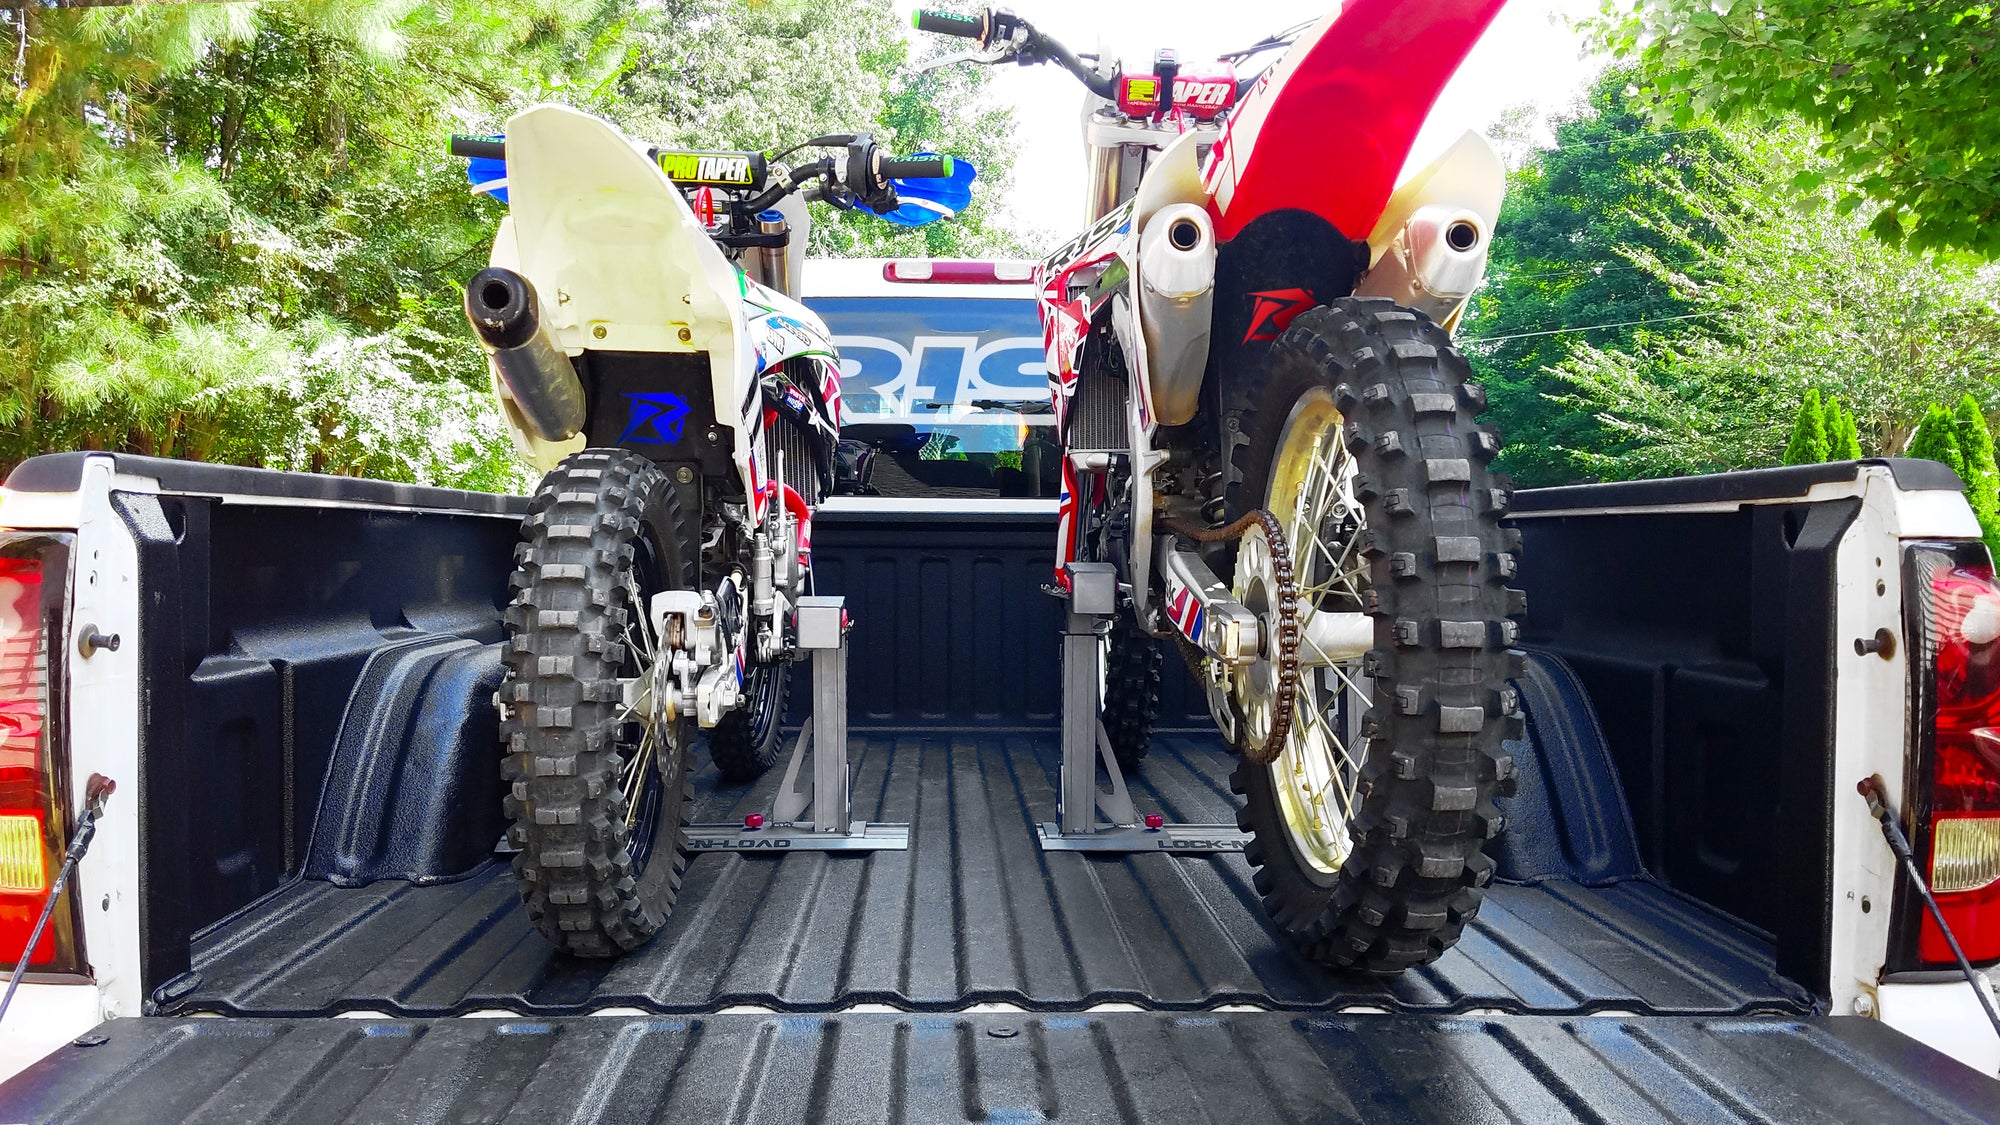 Will A Dirt Bike Fit in A Short Bed Truck? What about 2 bikes?